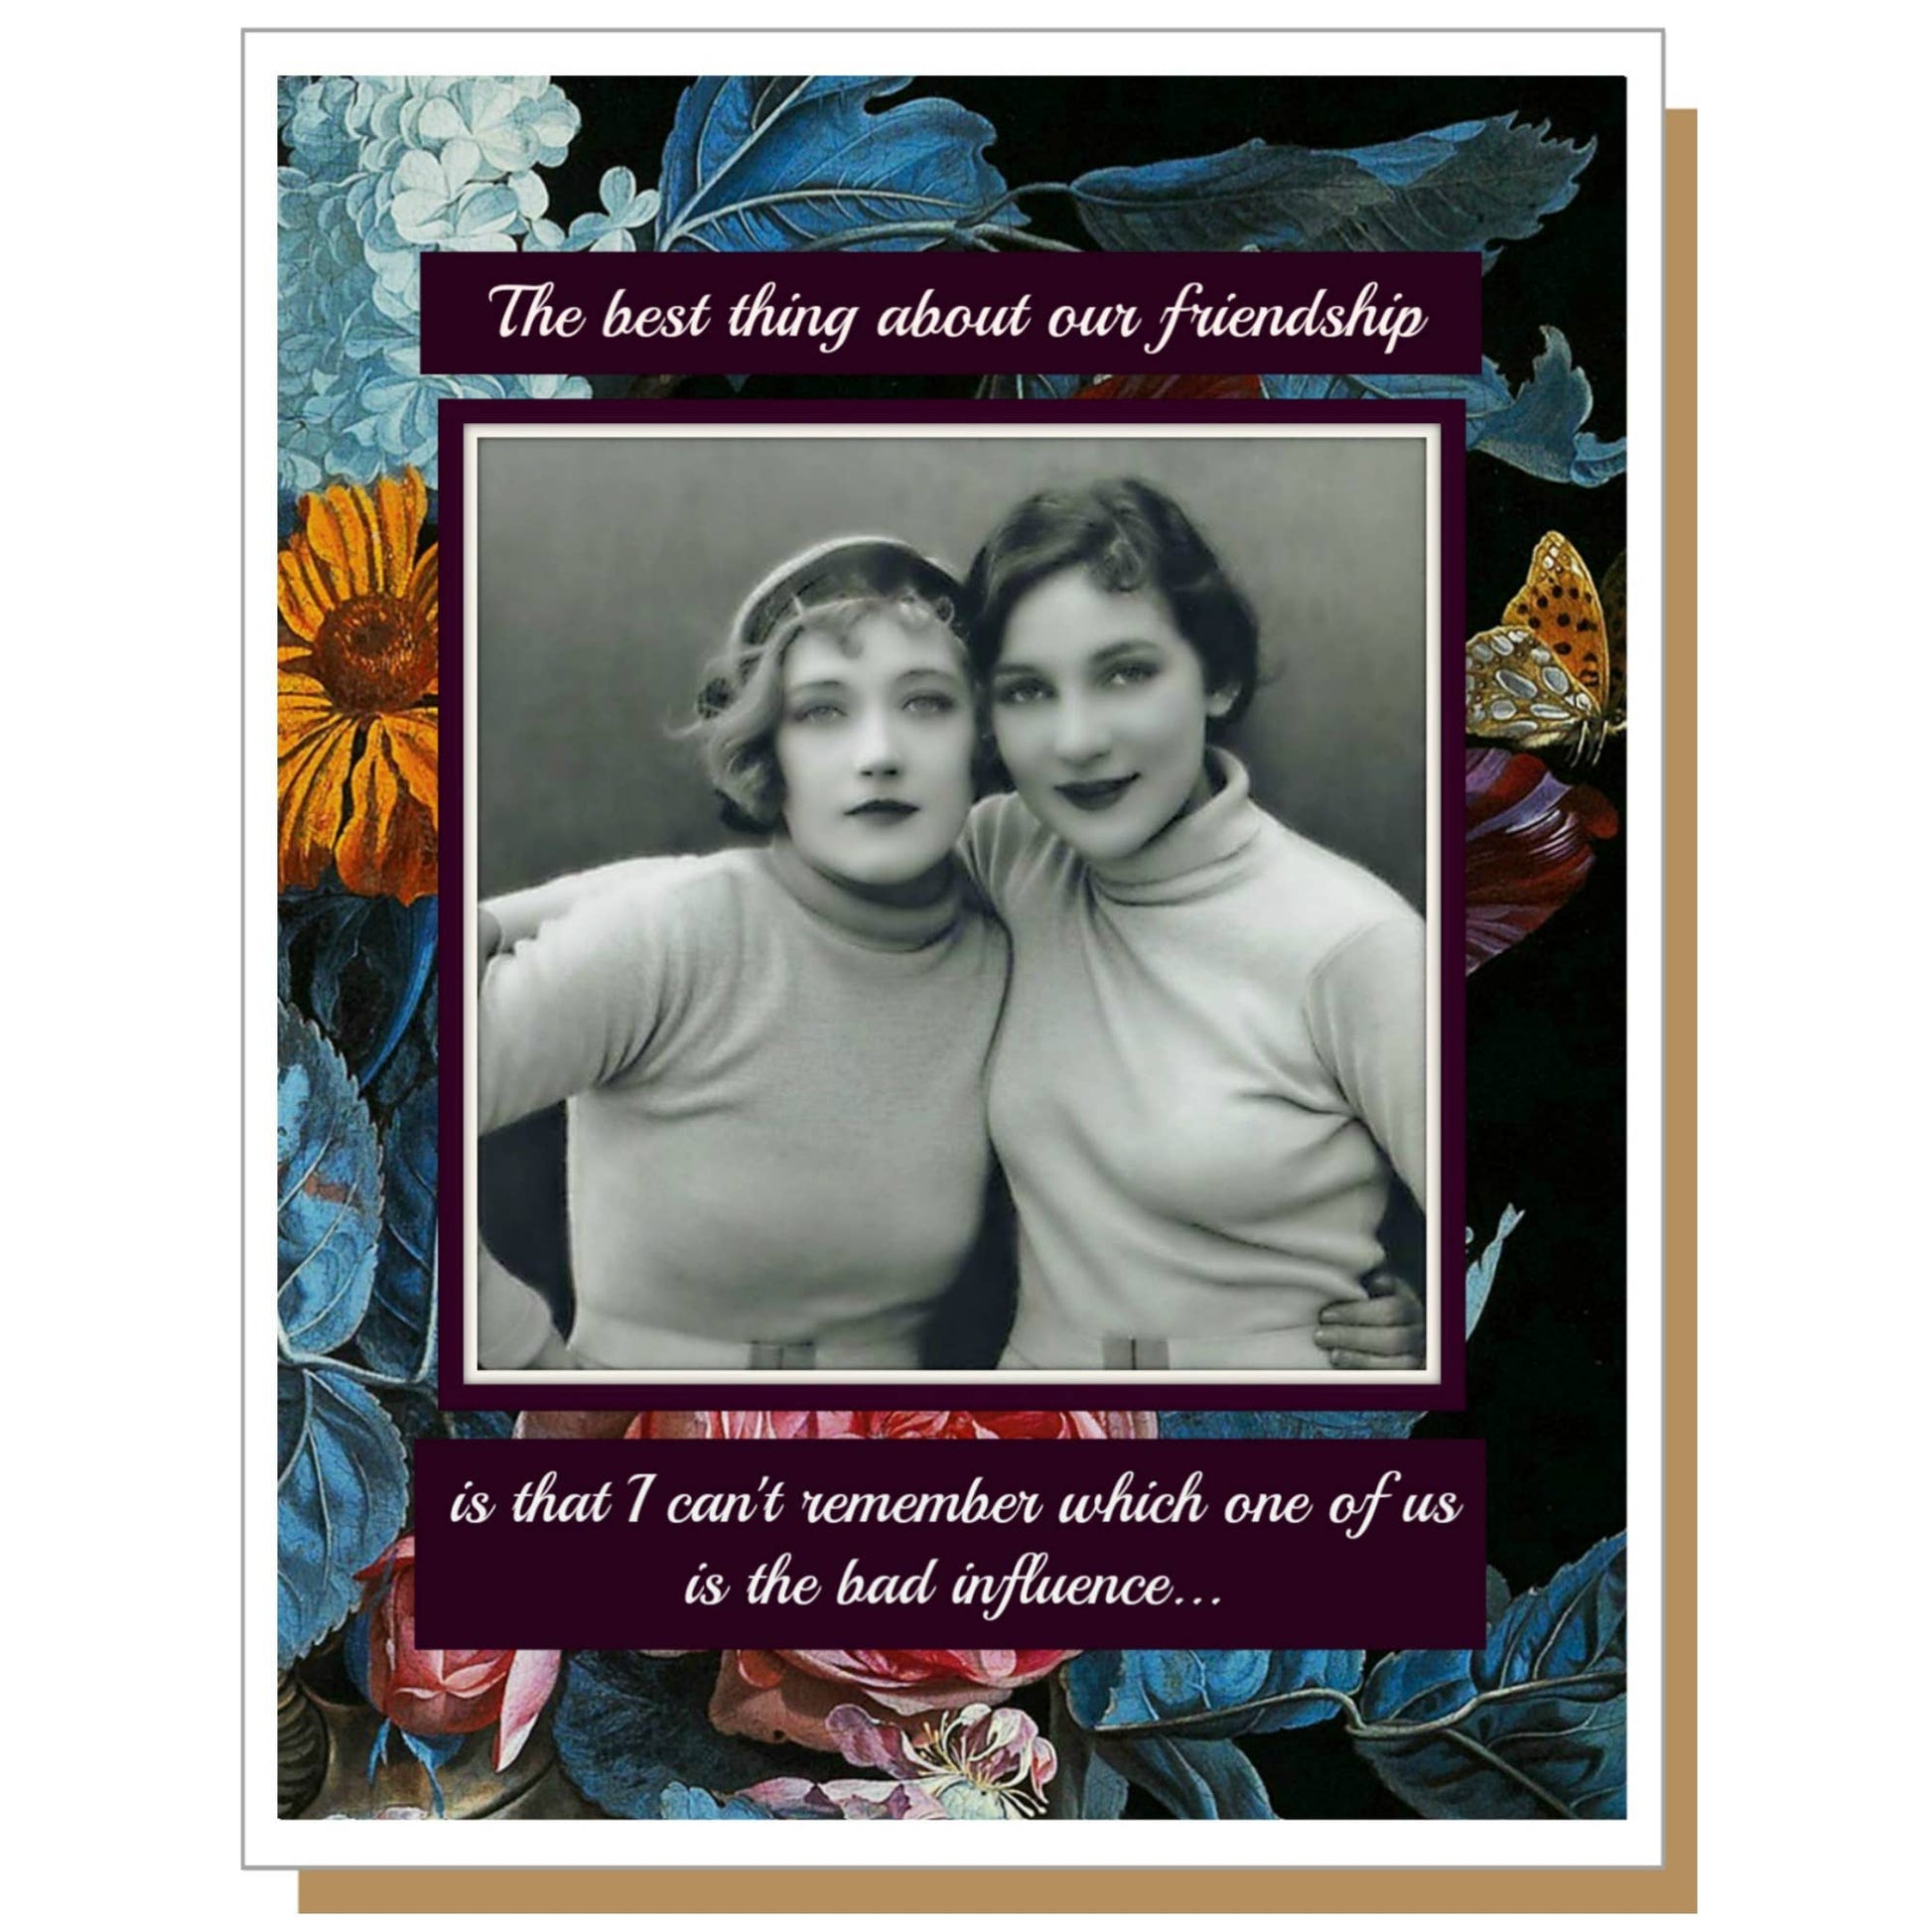 The Best Thing About Our Friendship Is That I Can't Remember Which One Of Us Is The Bad Influence - Greeting Card - Mellow Monkey